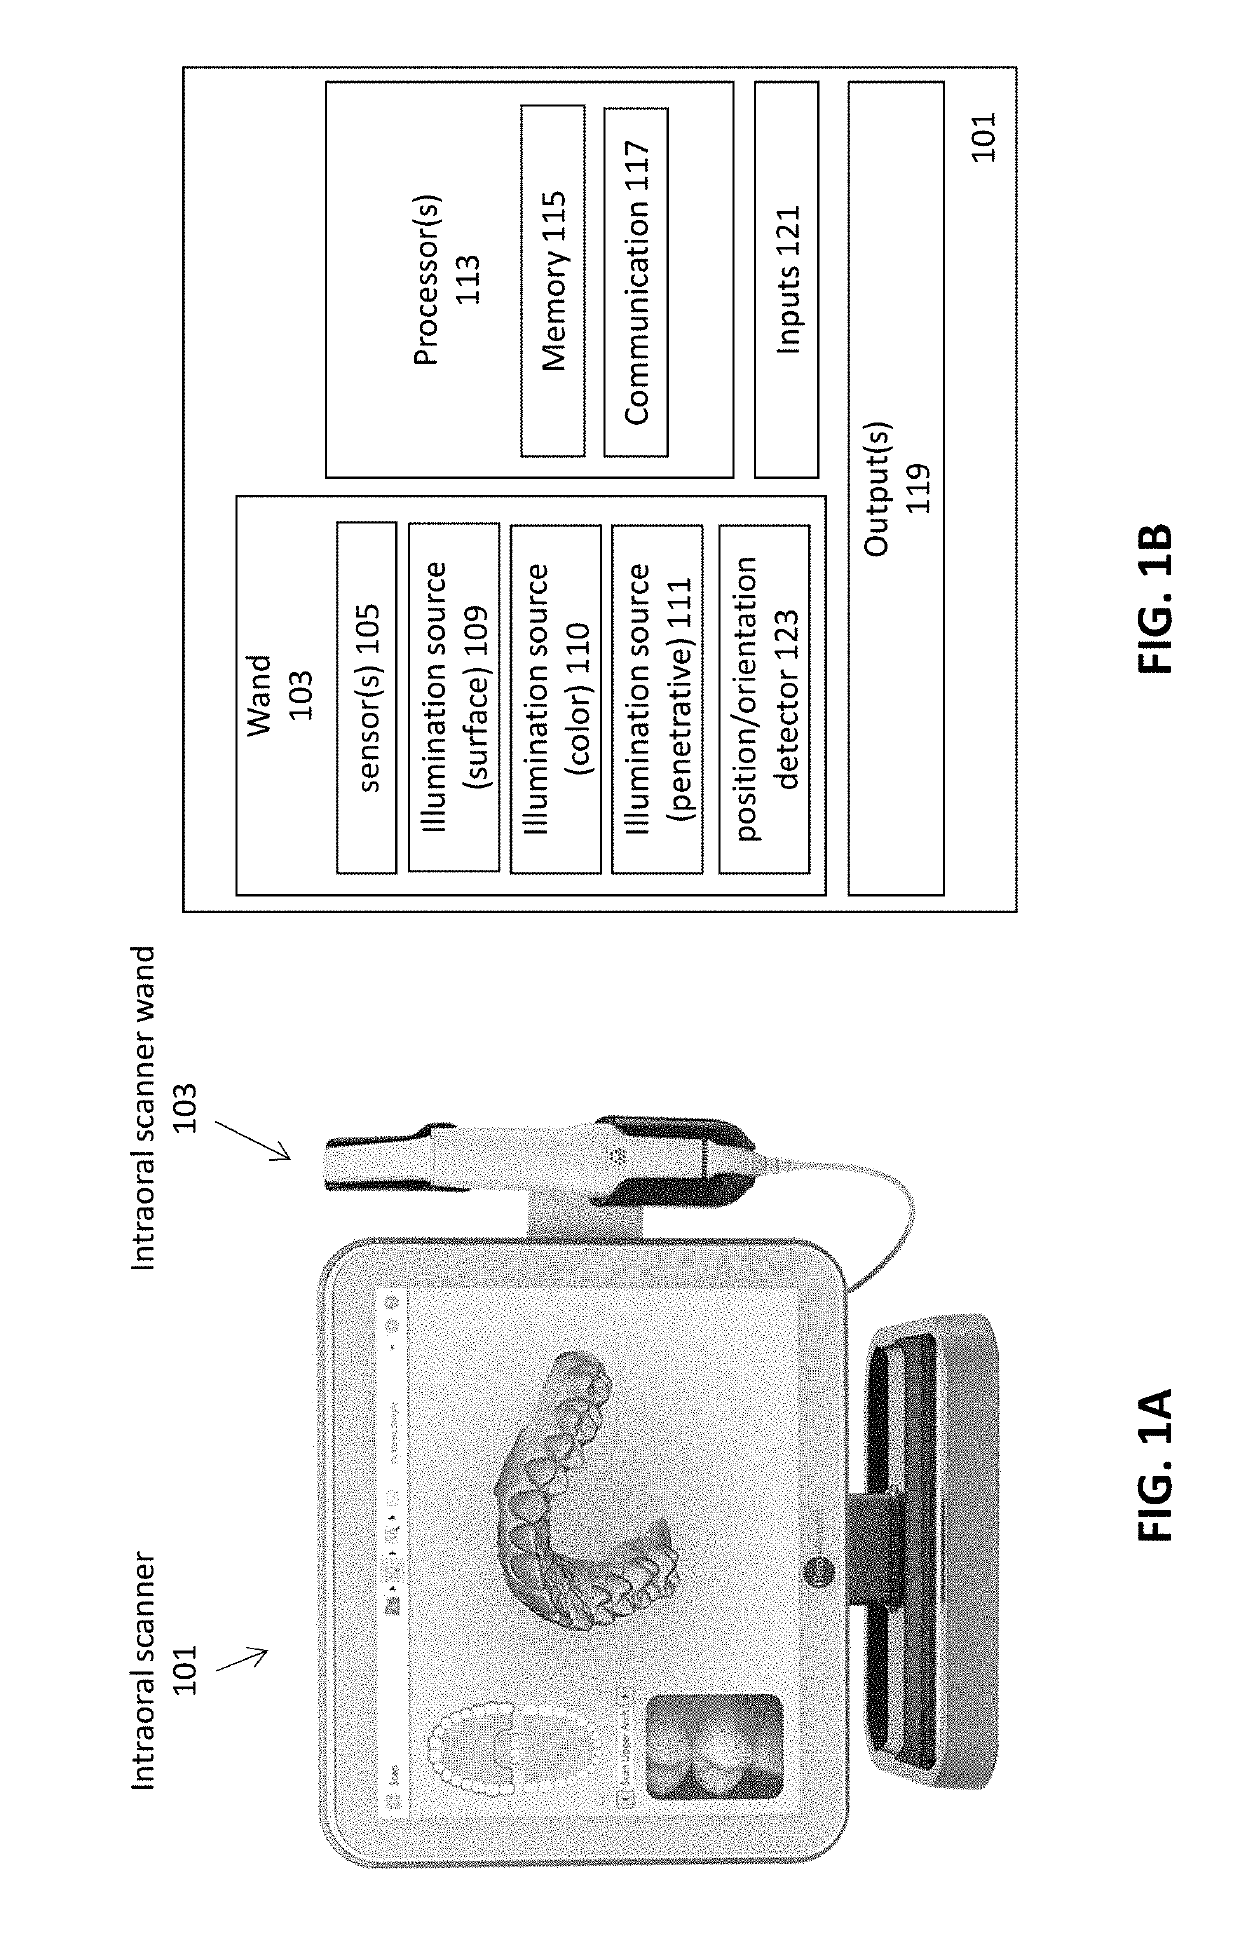 Methods and apparatuses for forming a three-dimensional volumetric model of a subject's teeth